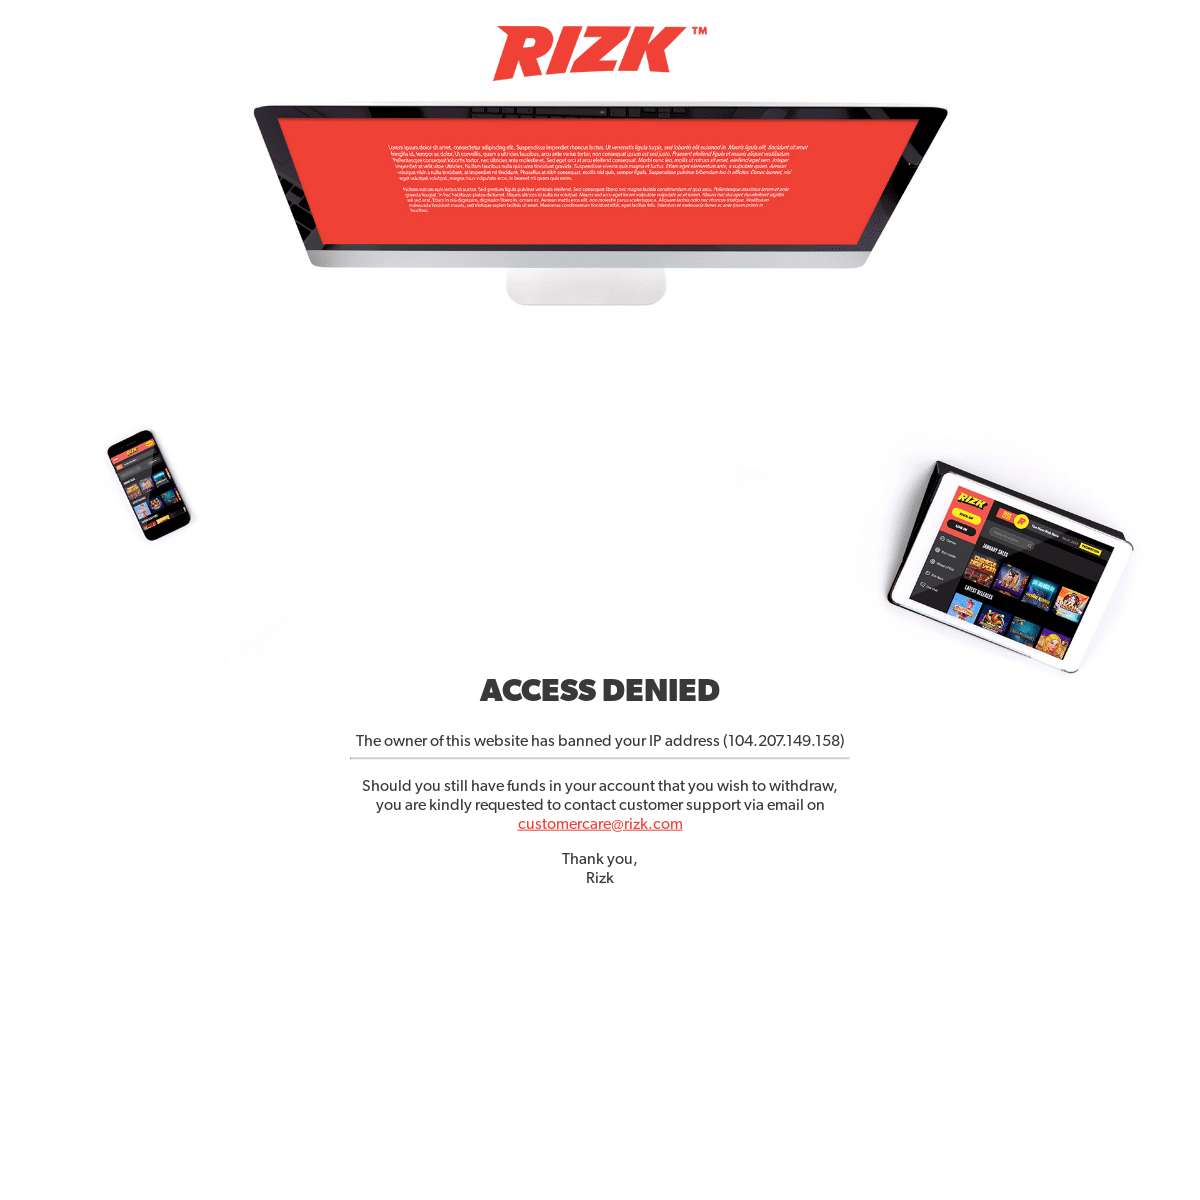 A complete backup of rizk.com